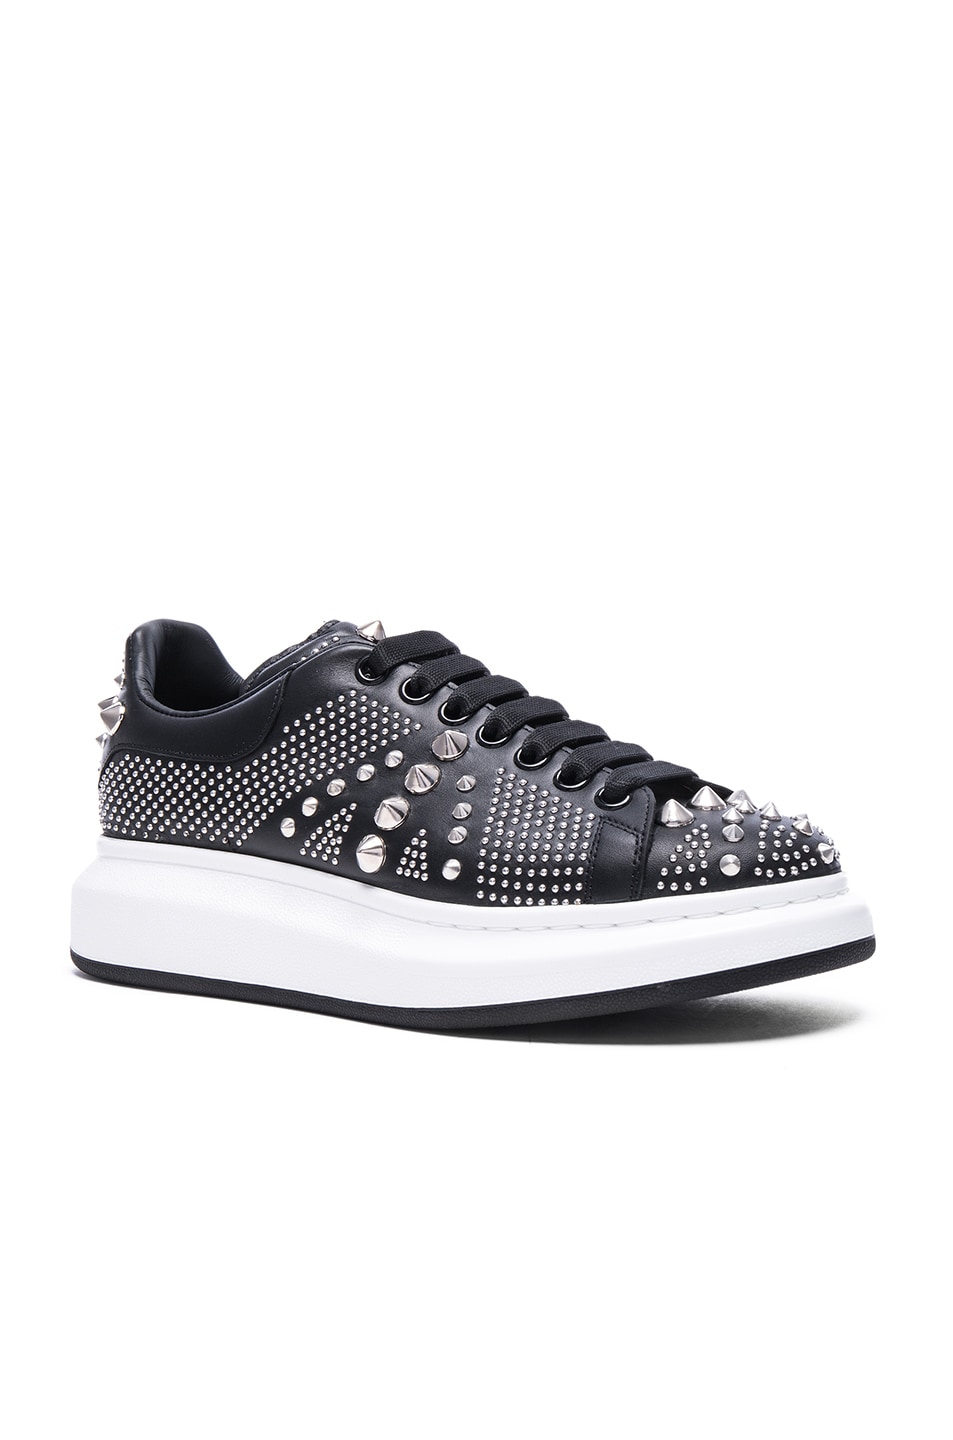 Image 1 of Alexander McQueen Studded Union Jack Larry Leather Sneakers in Black